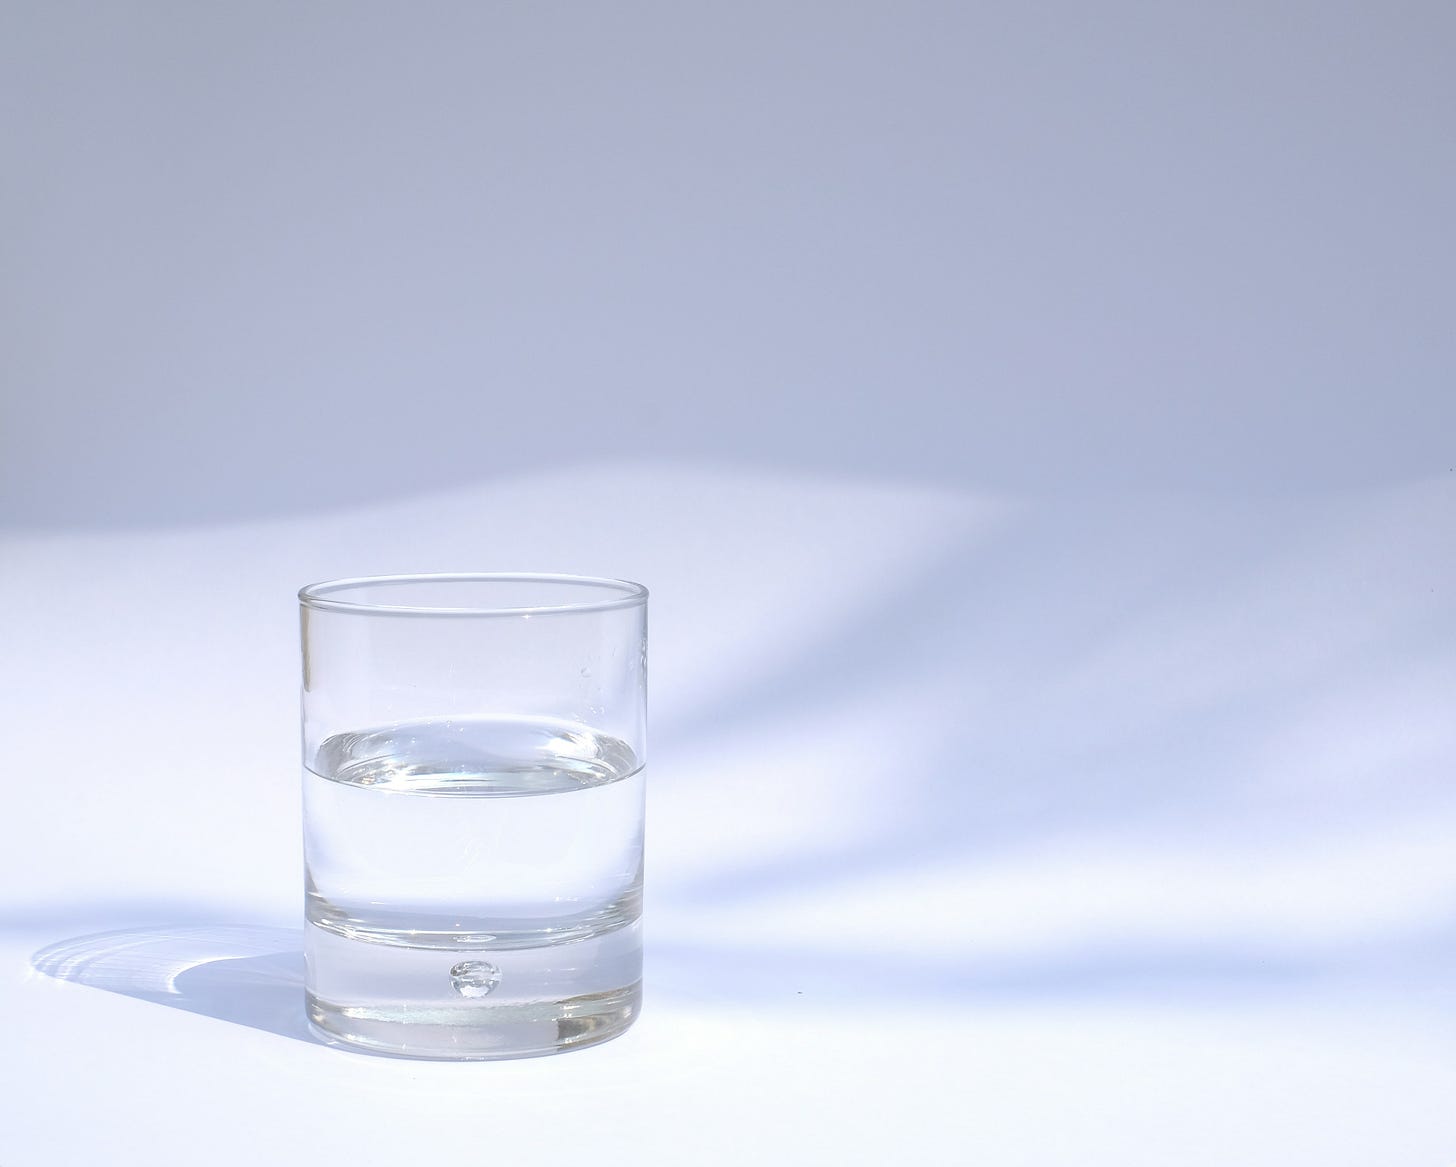 Half a glass of water set against a white backdrop.